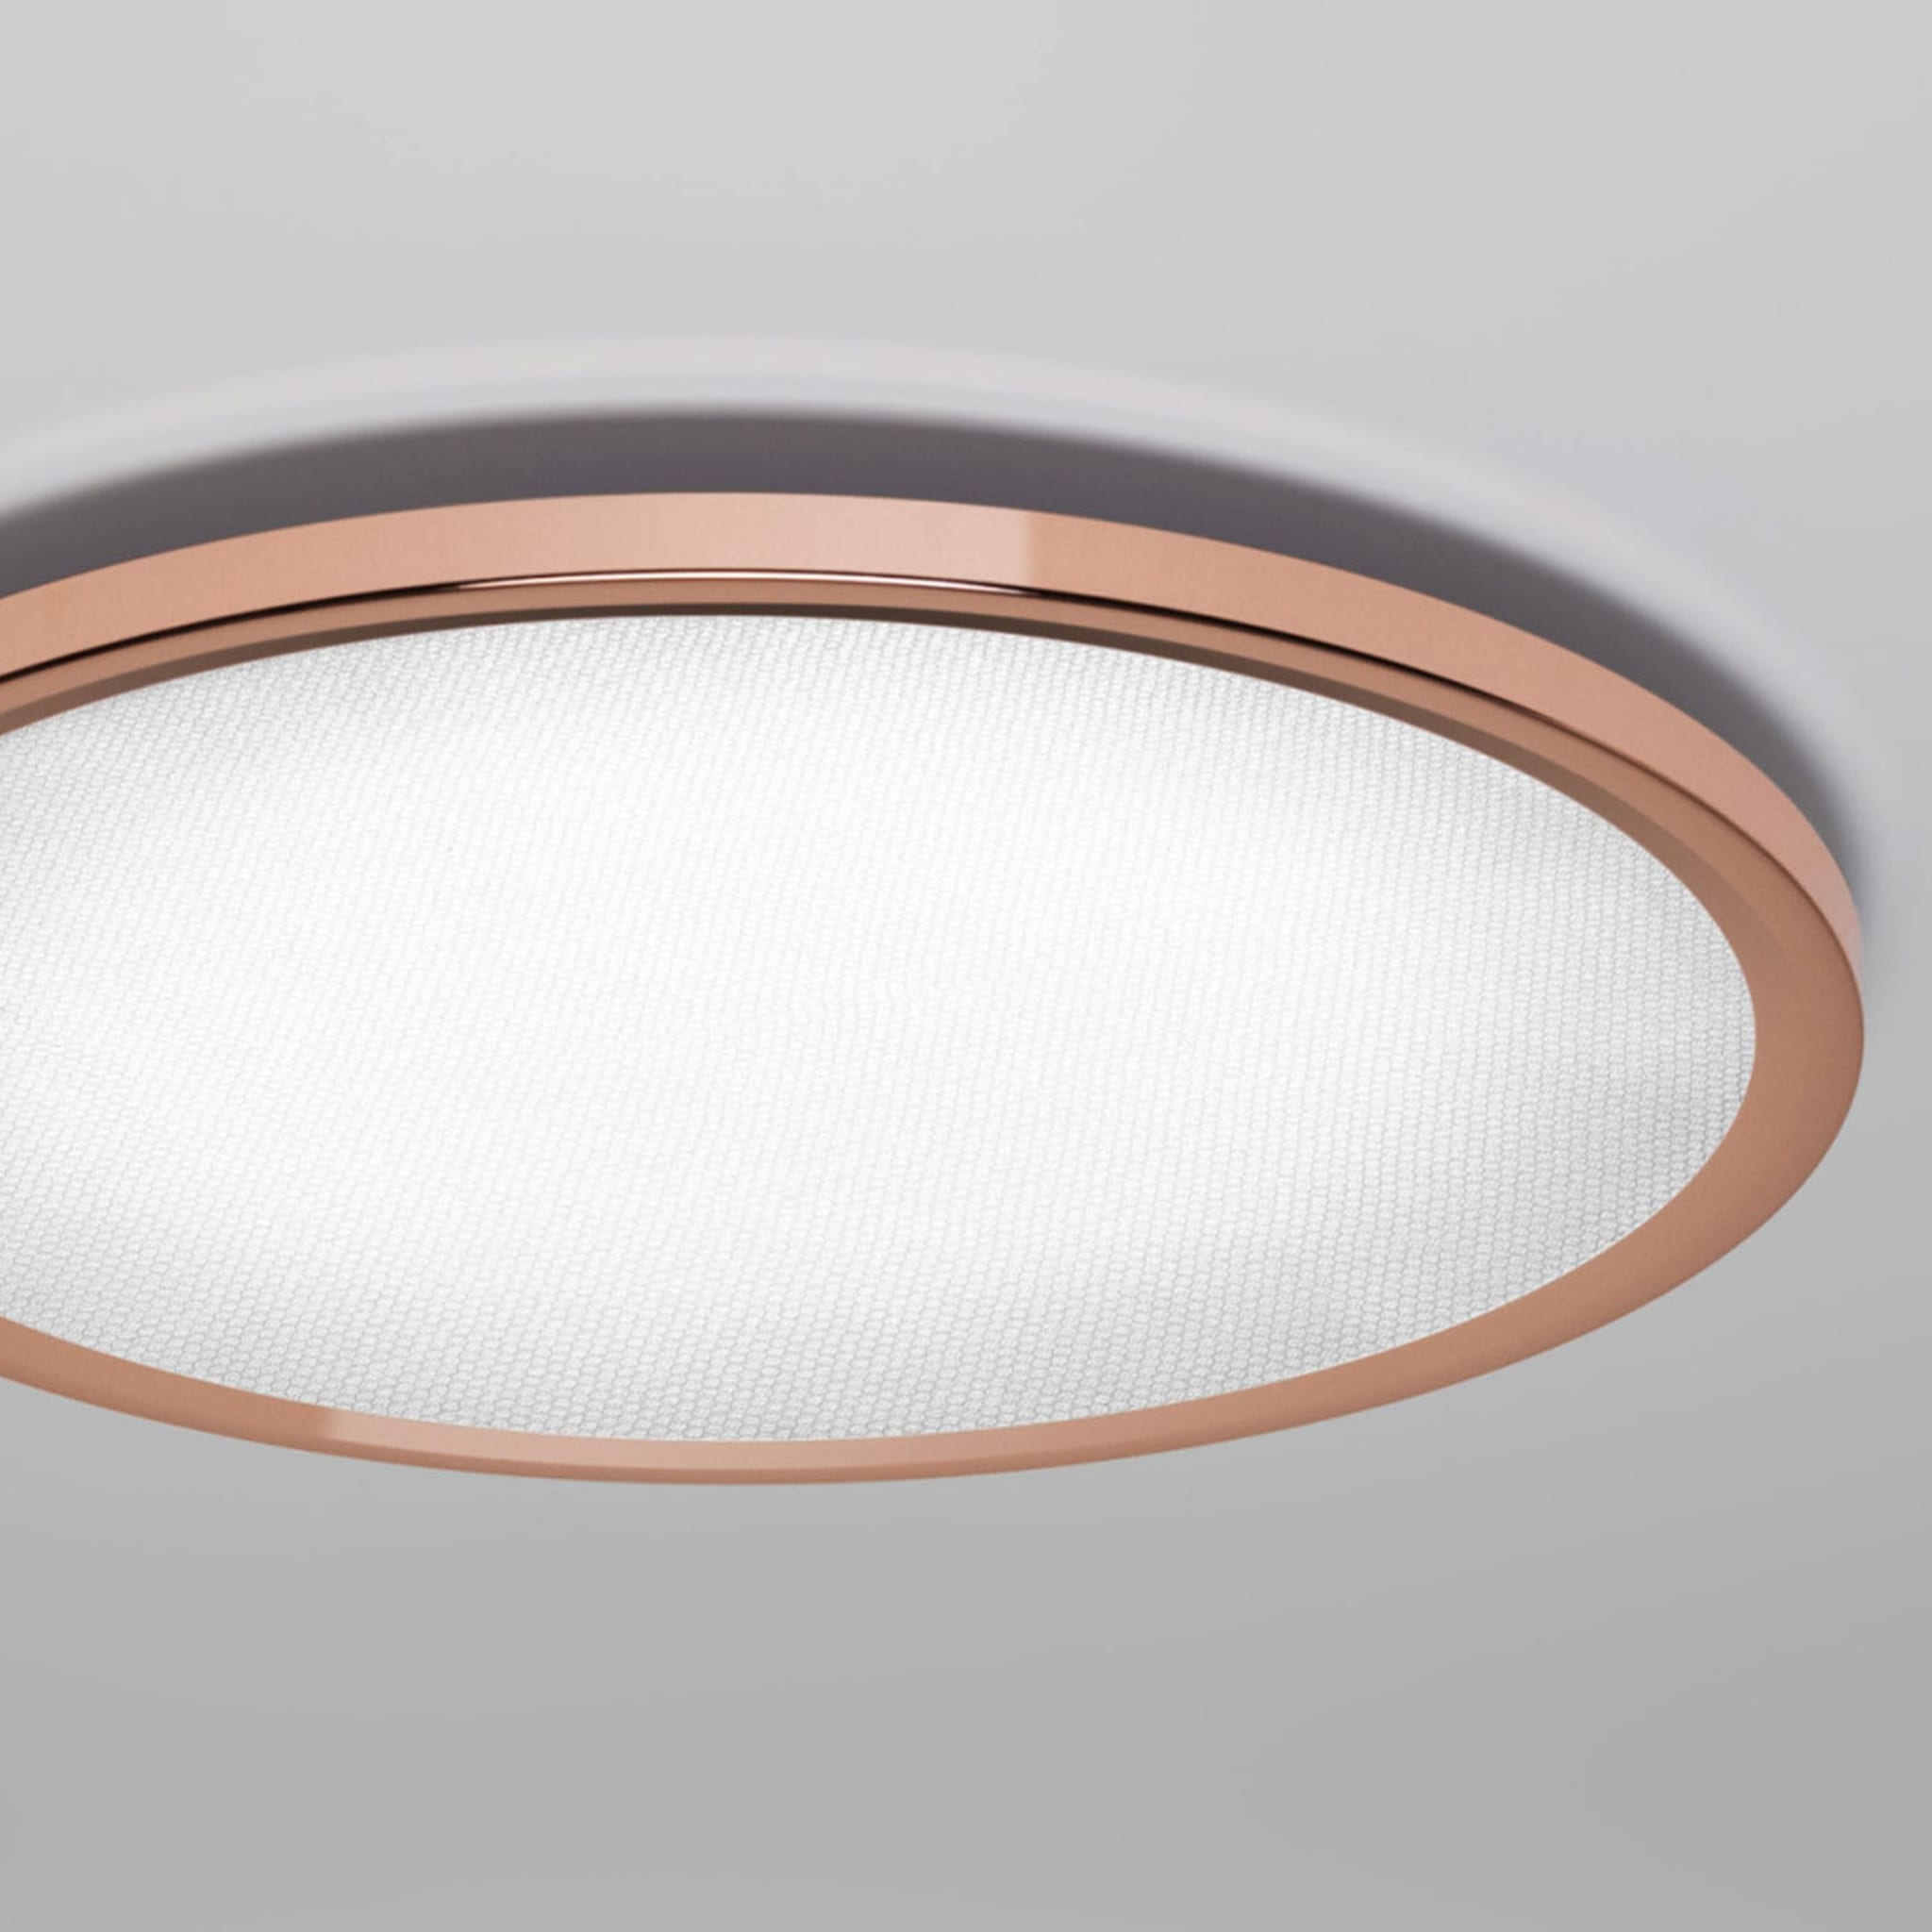 Hinomaru S Small Pink Gold Ceiling Lamp - Alternative view 3